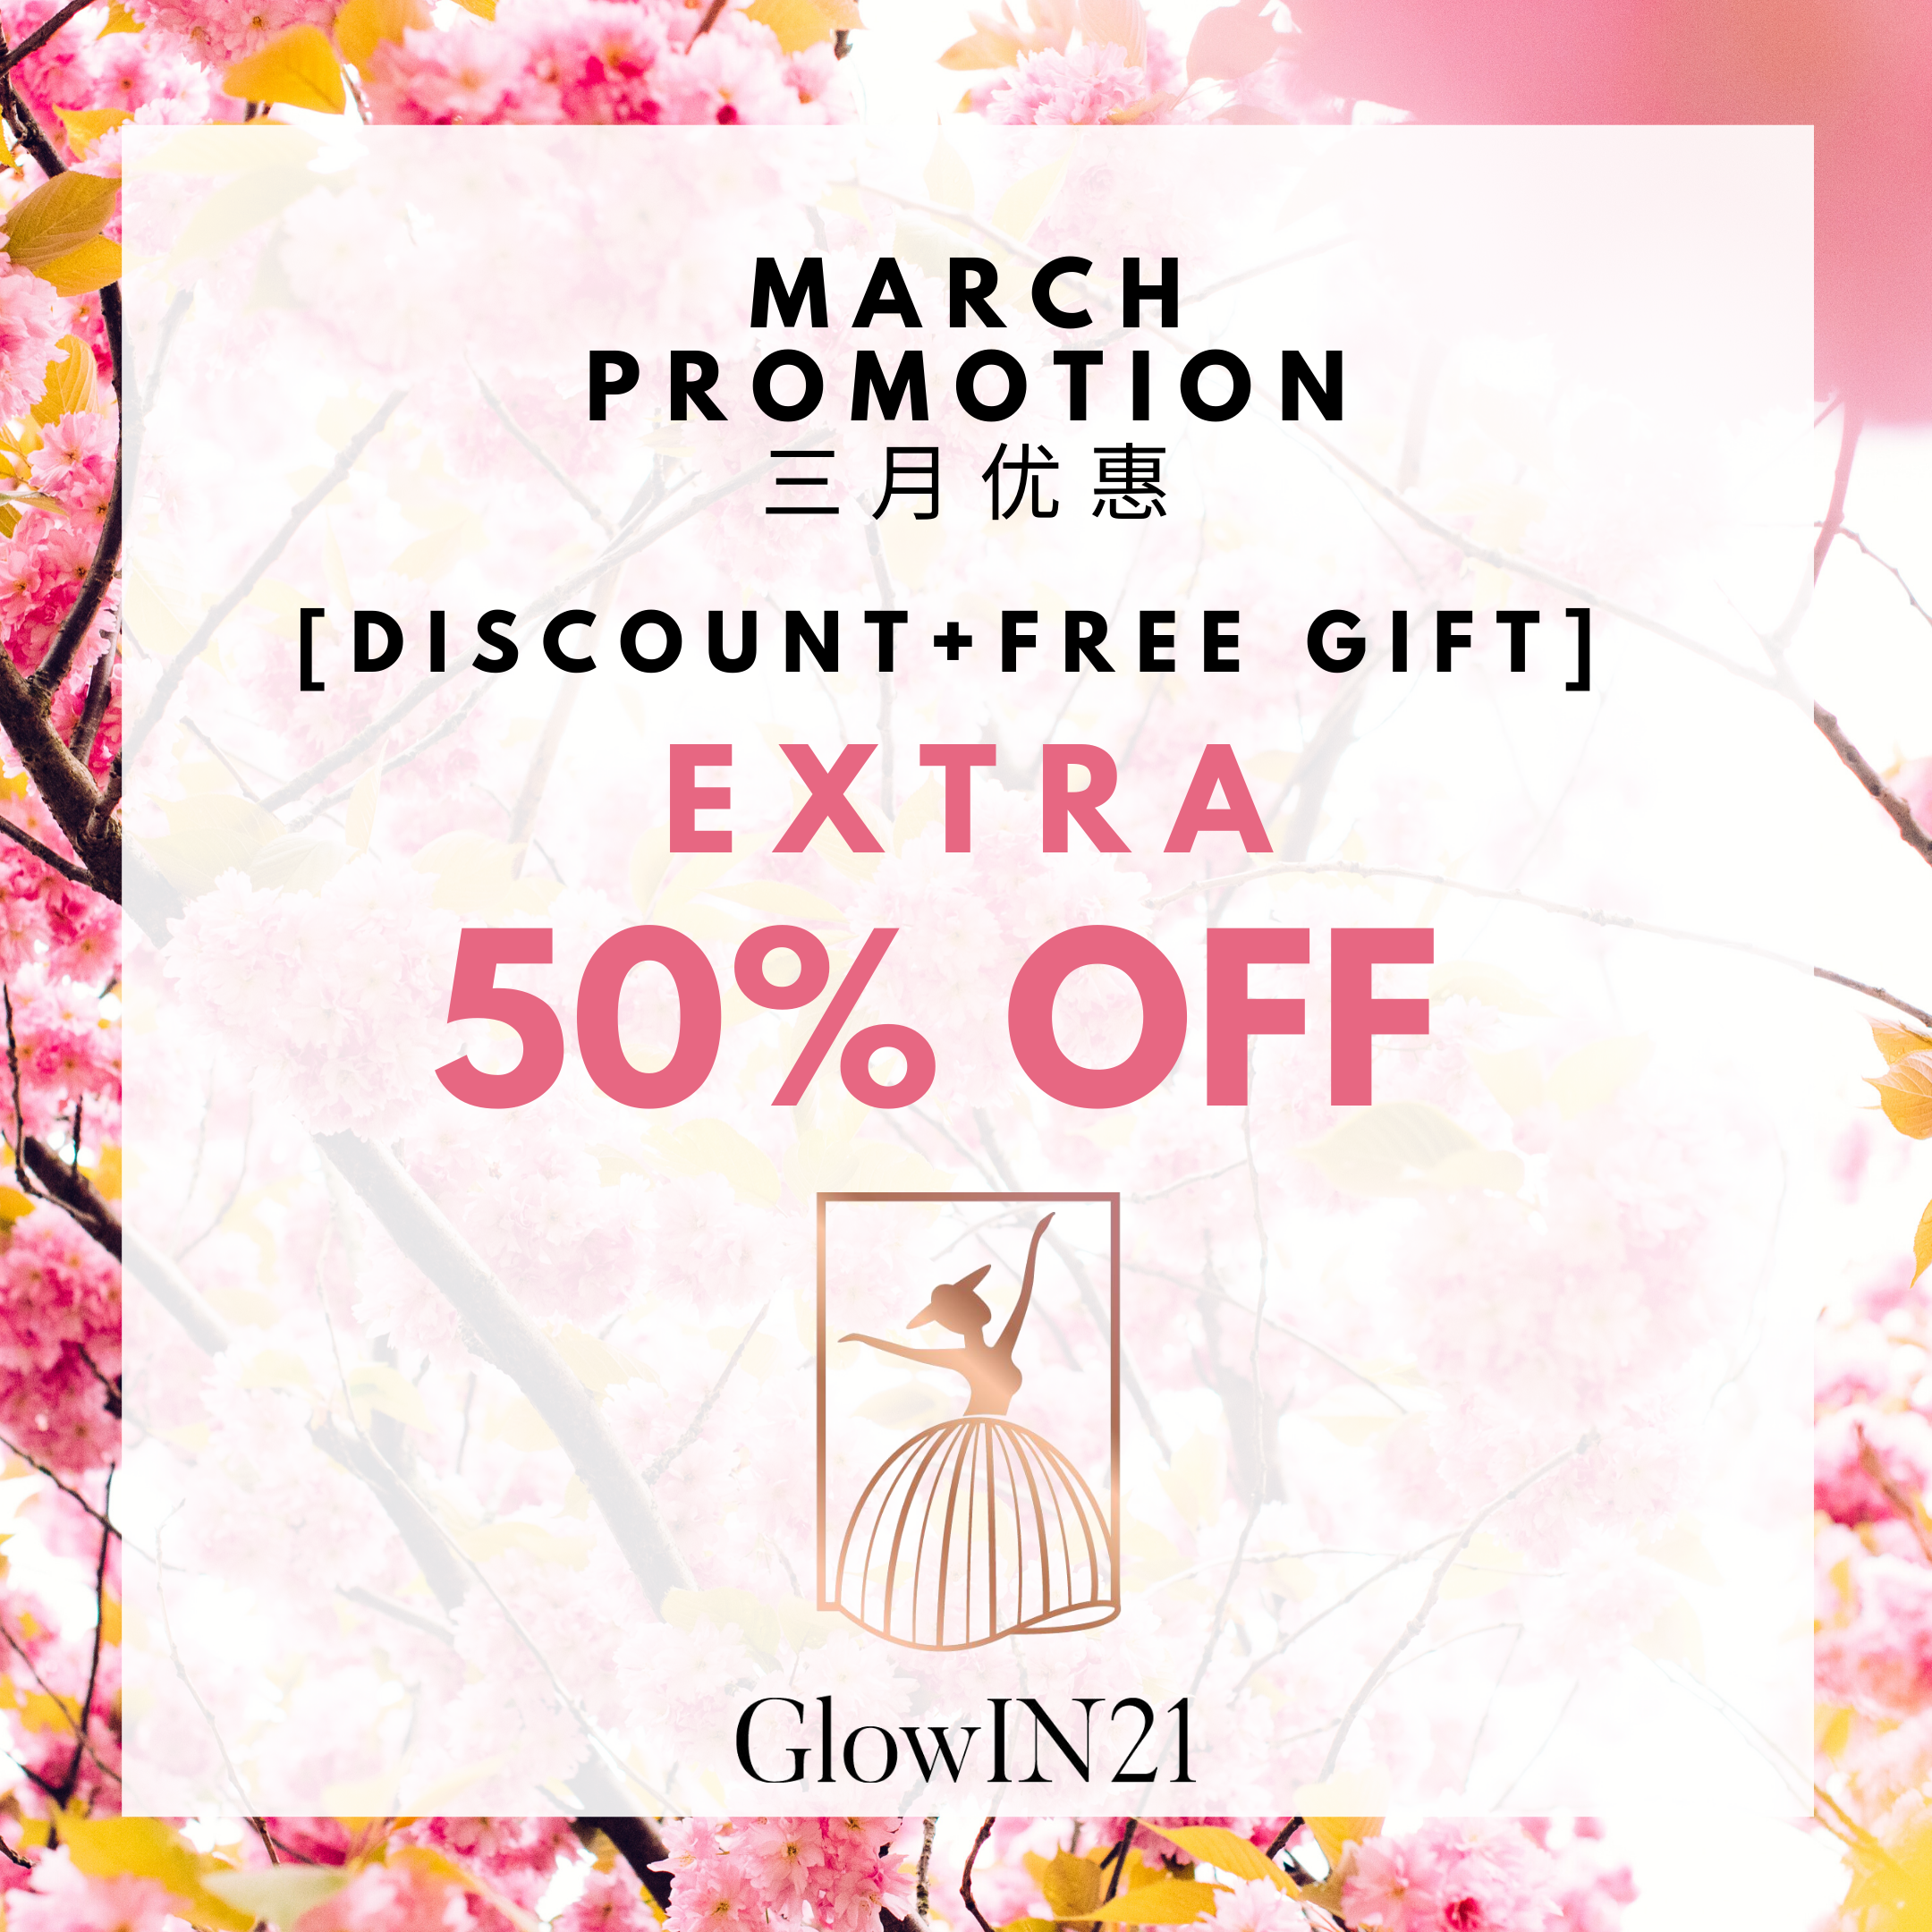 MARCH PROMOTION 2020